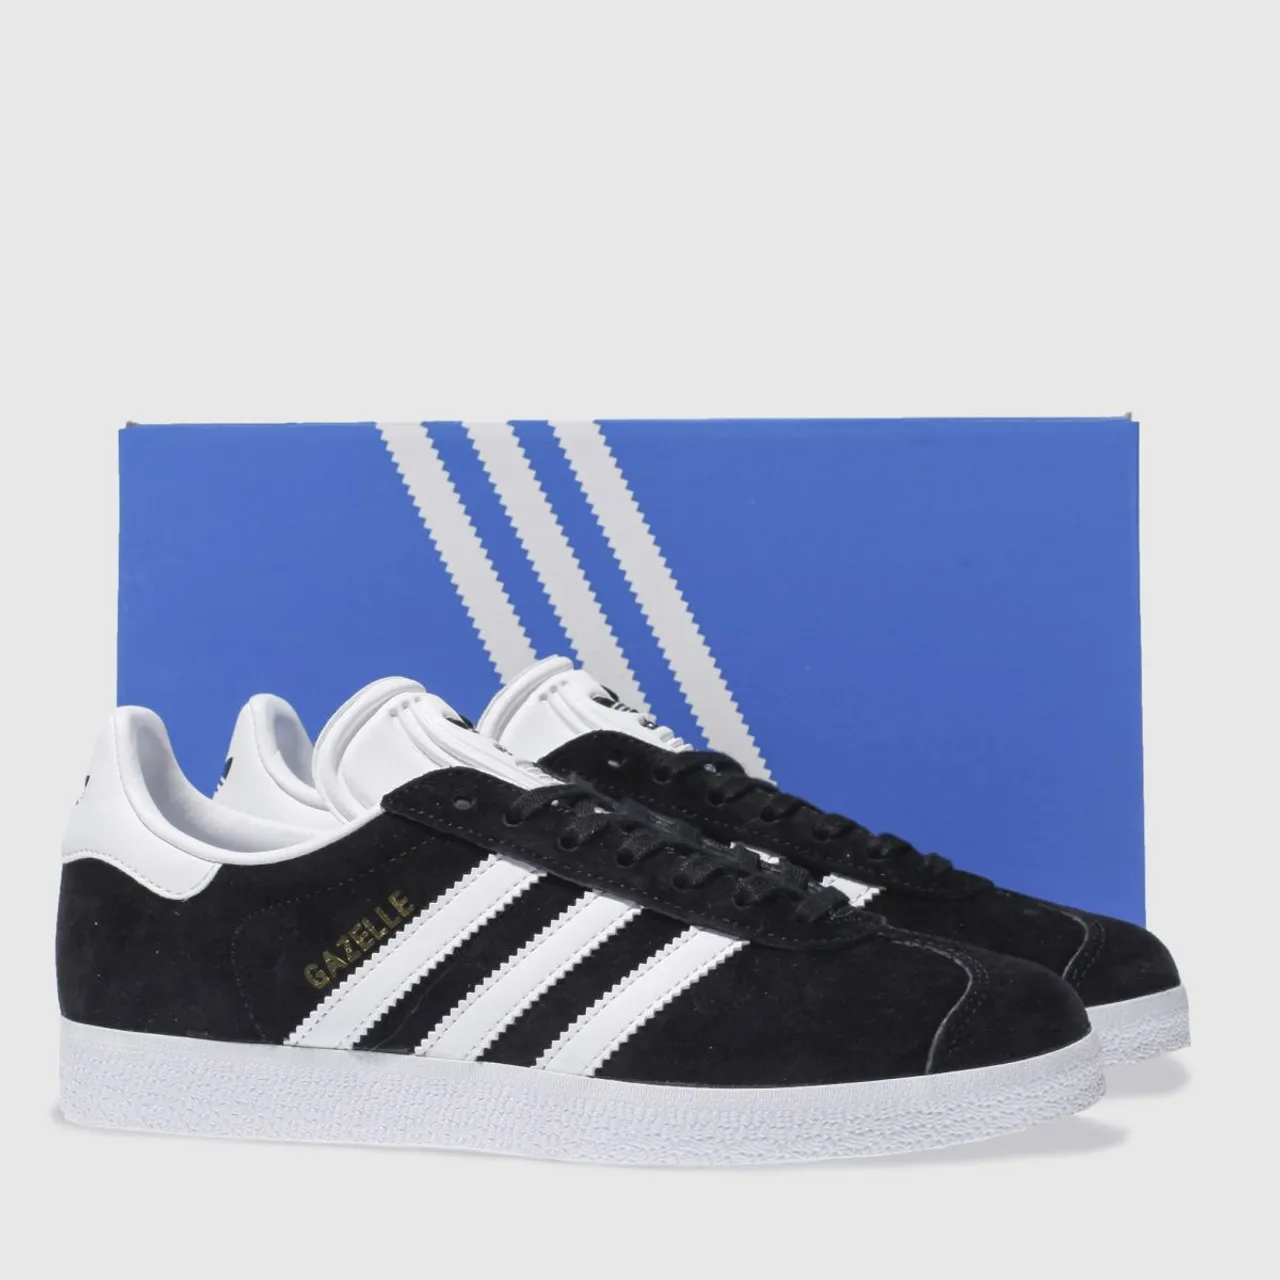 Adidas Gazelle Trainers In Black & White